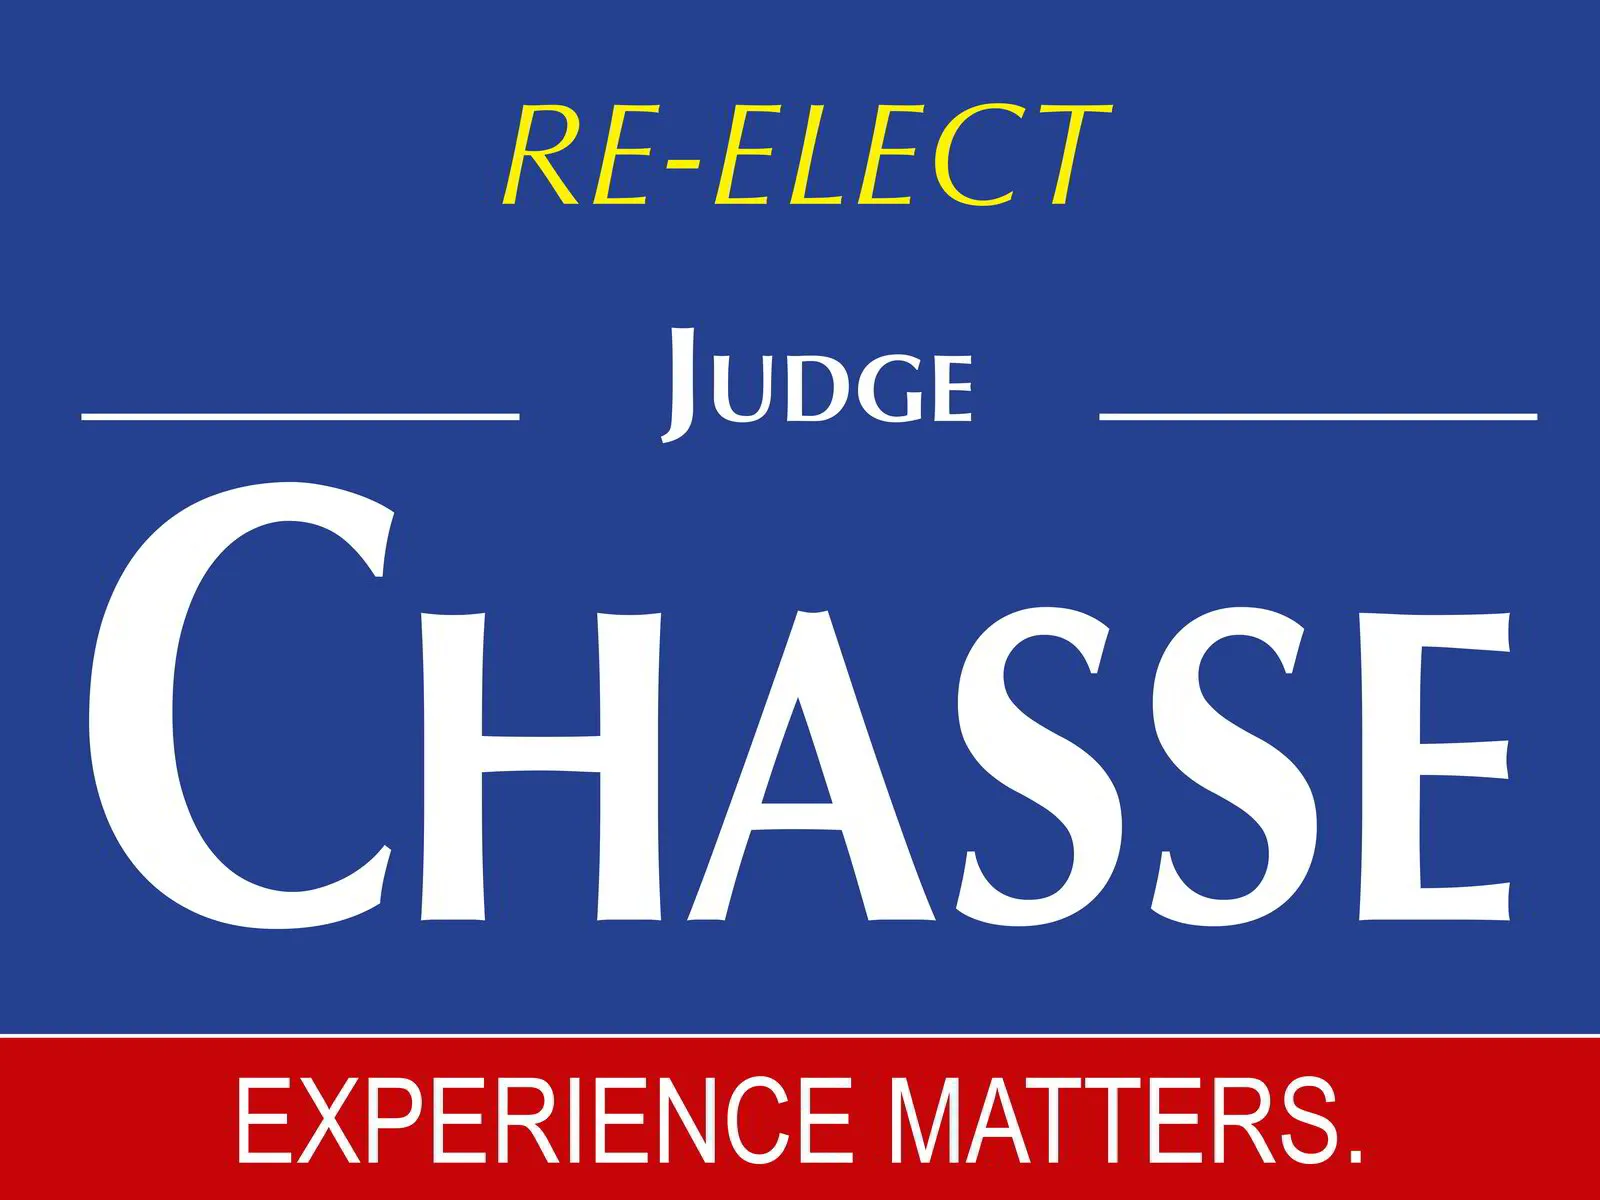 Reelect Judge Eric Chasse